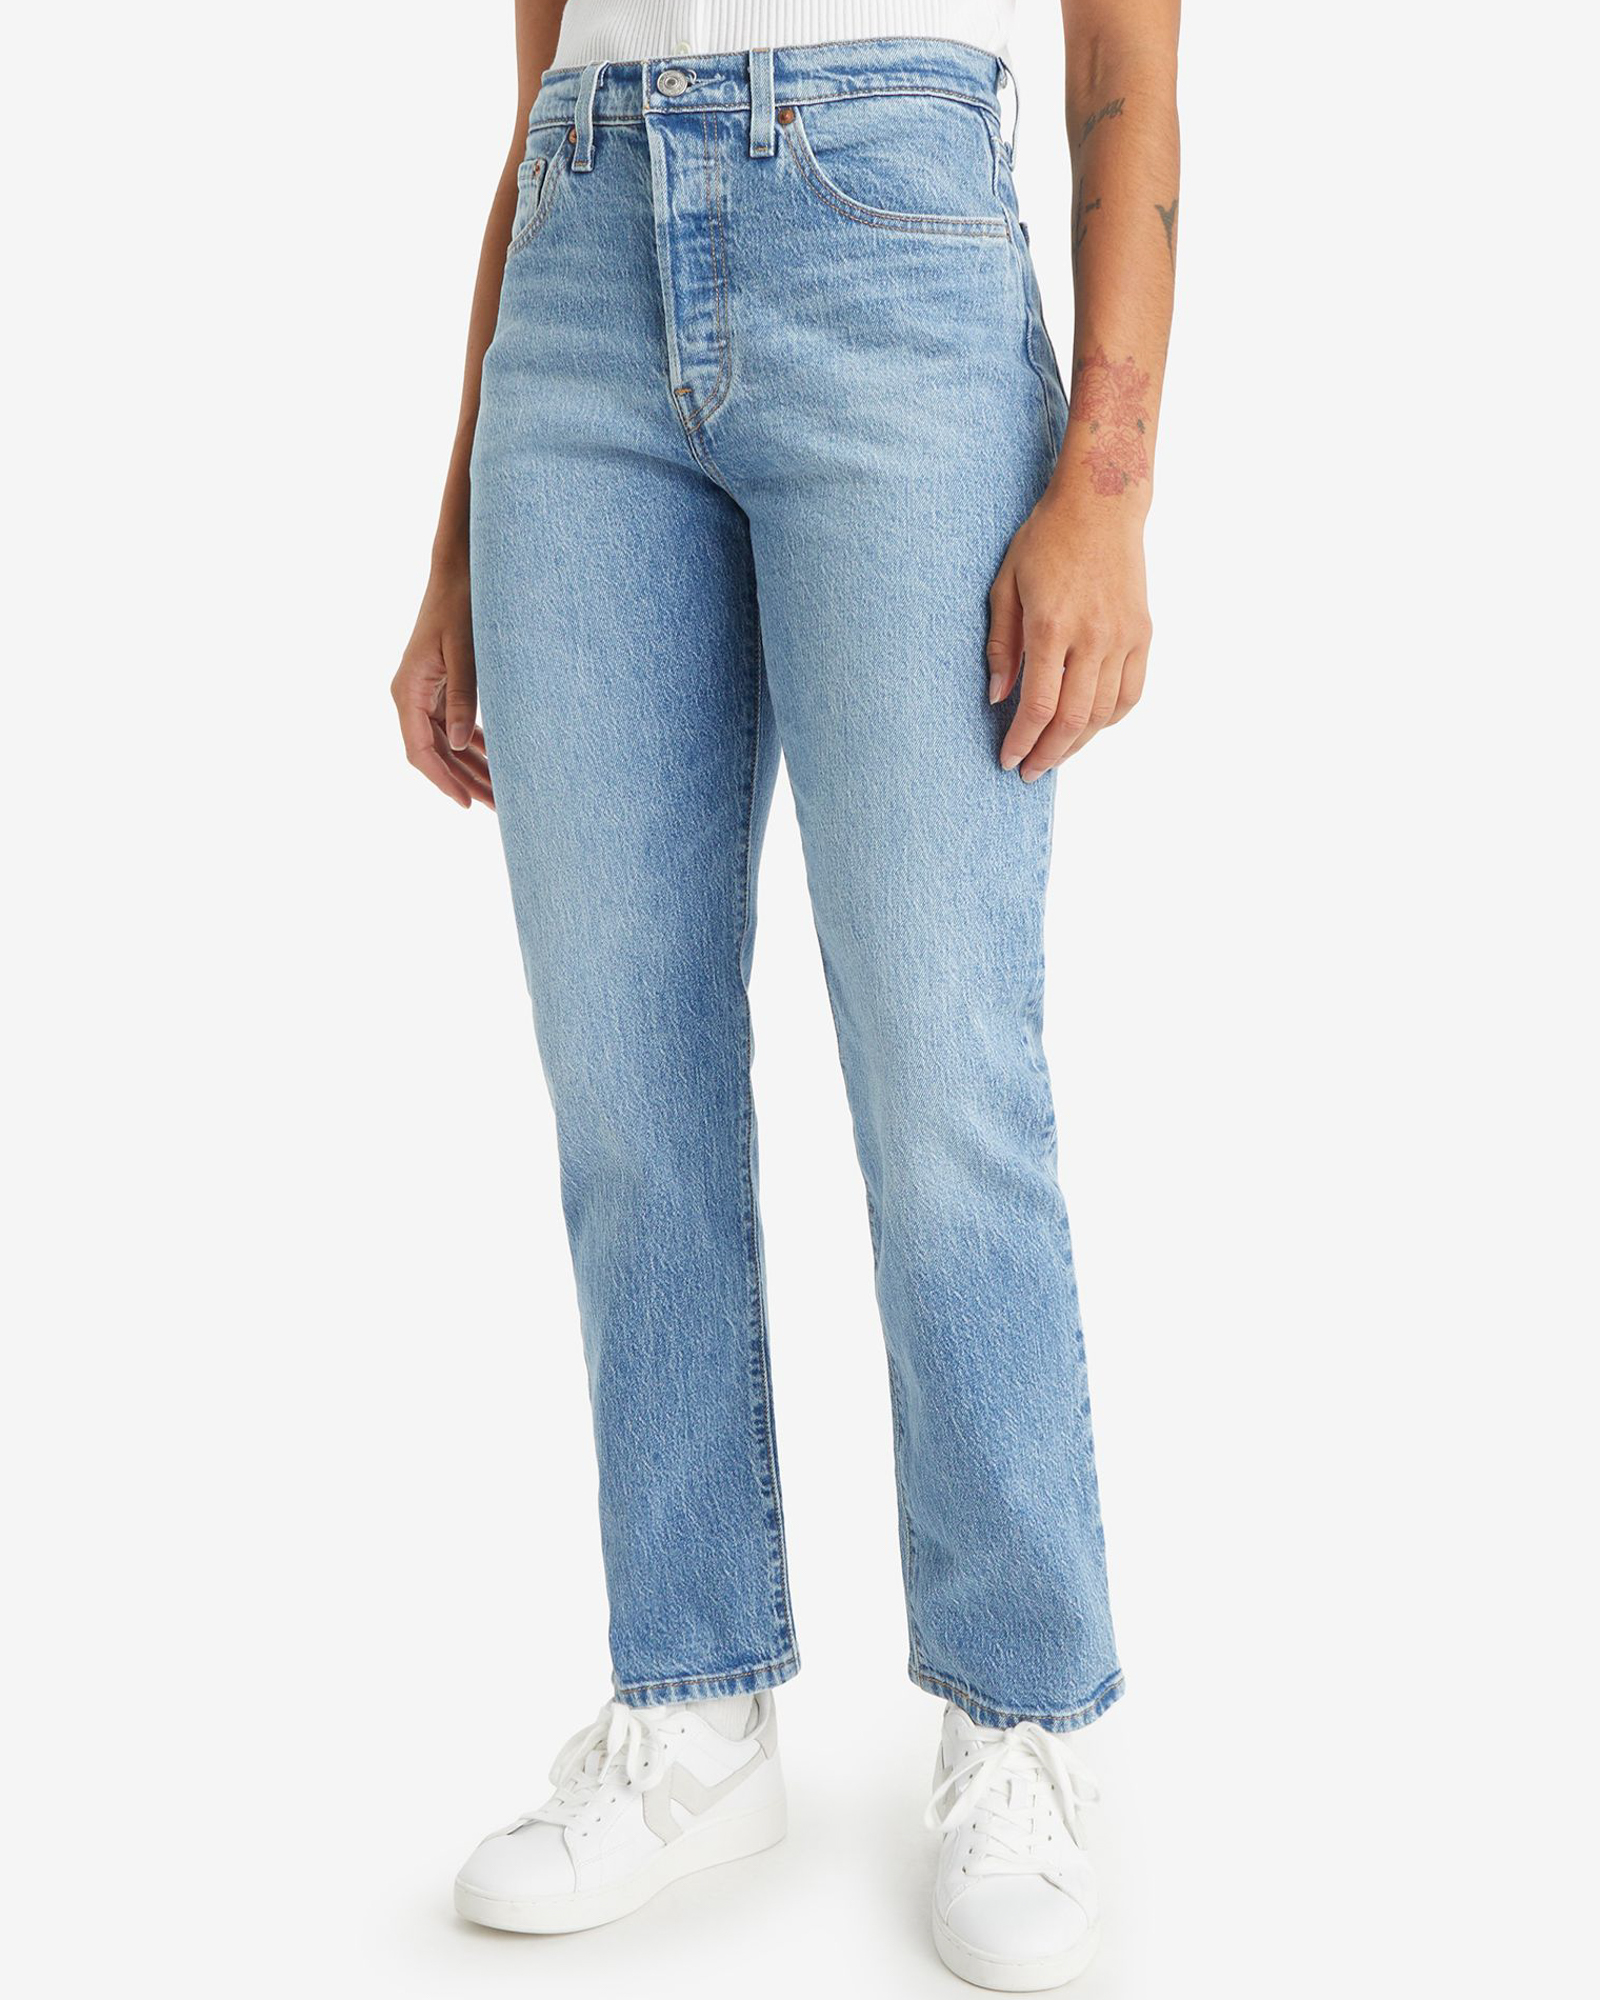 501 Jeans for Women - Hollow Days